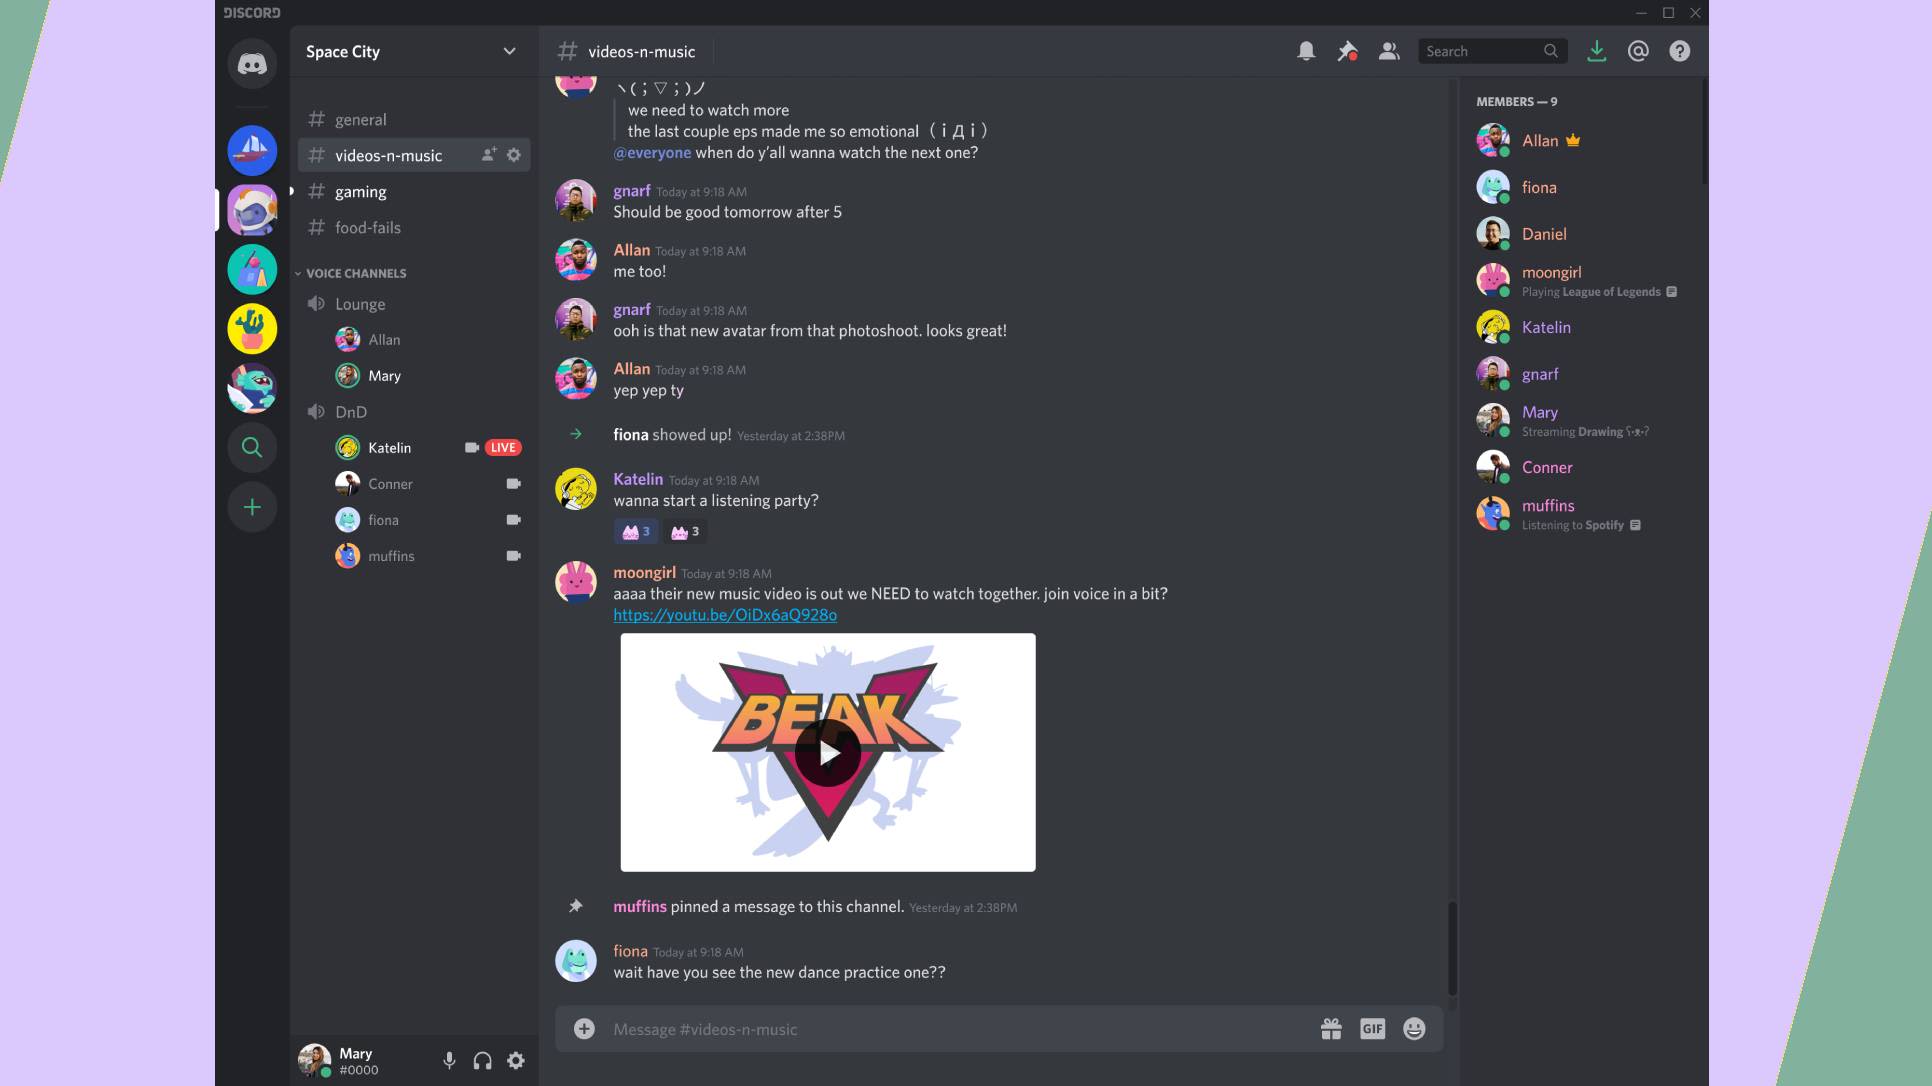 Discord app: Everything you need to know